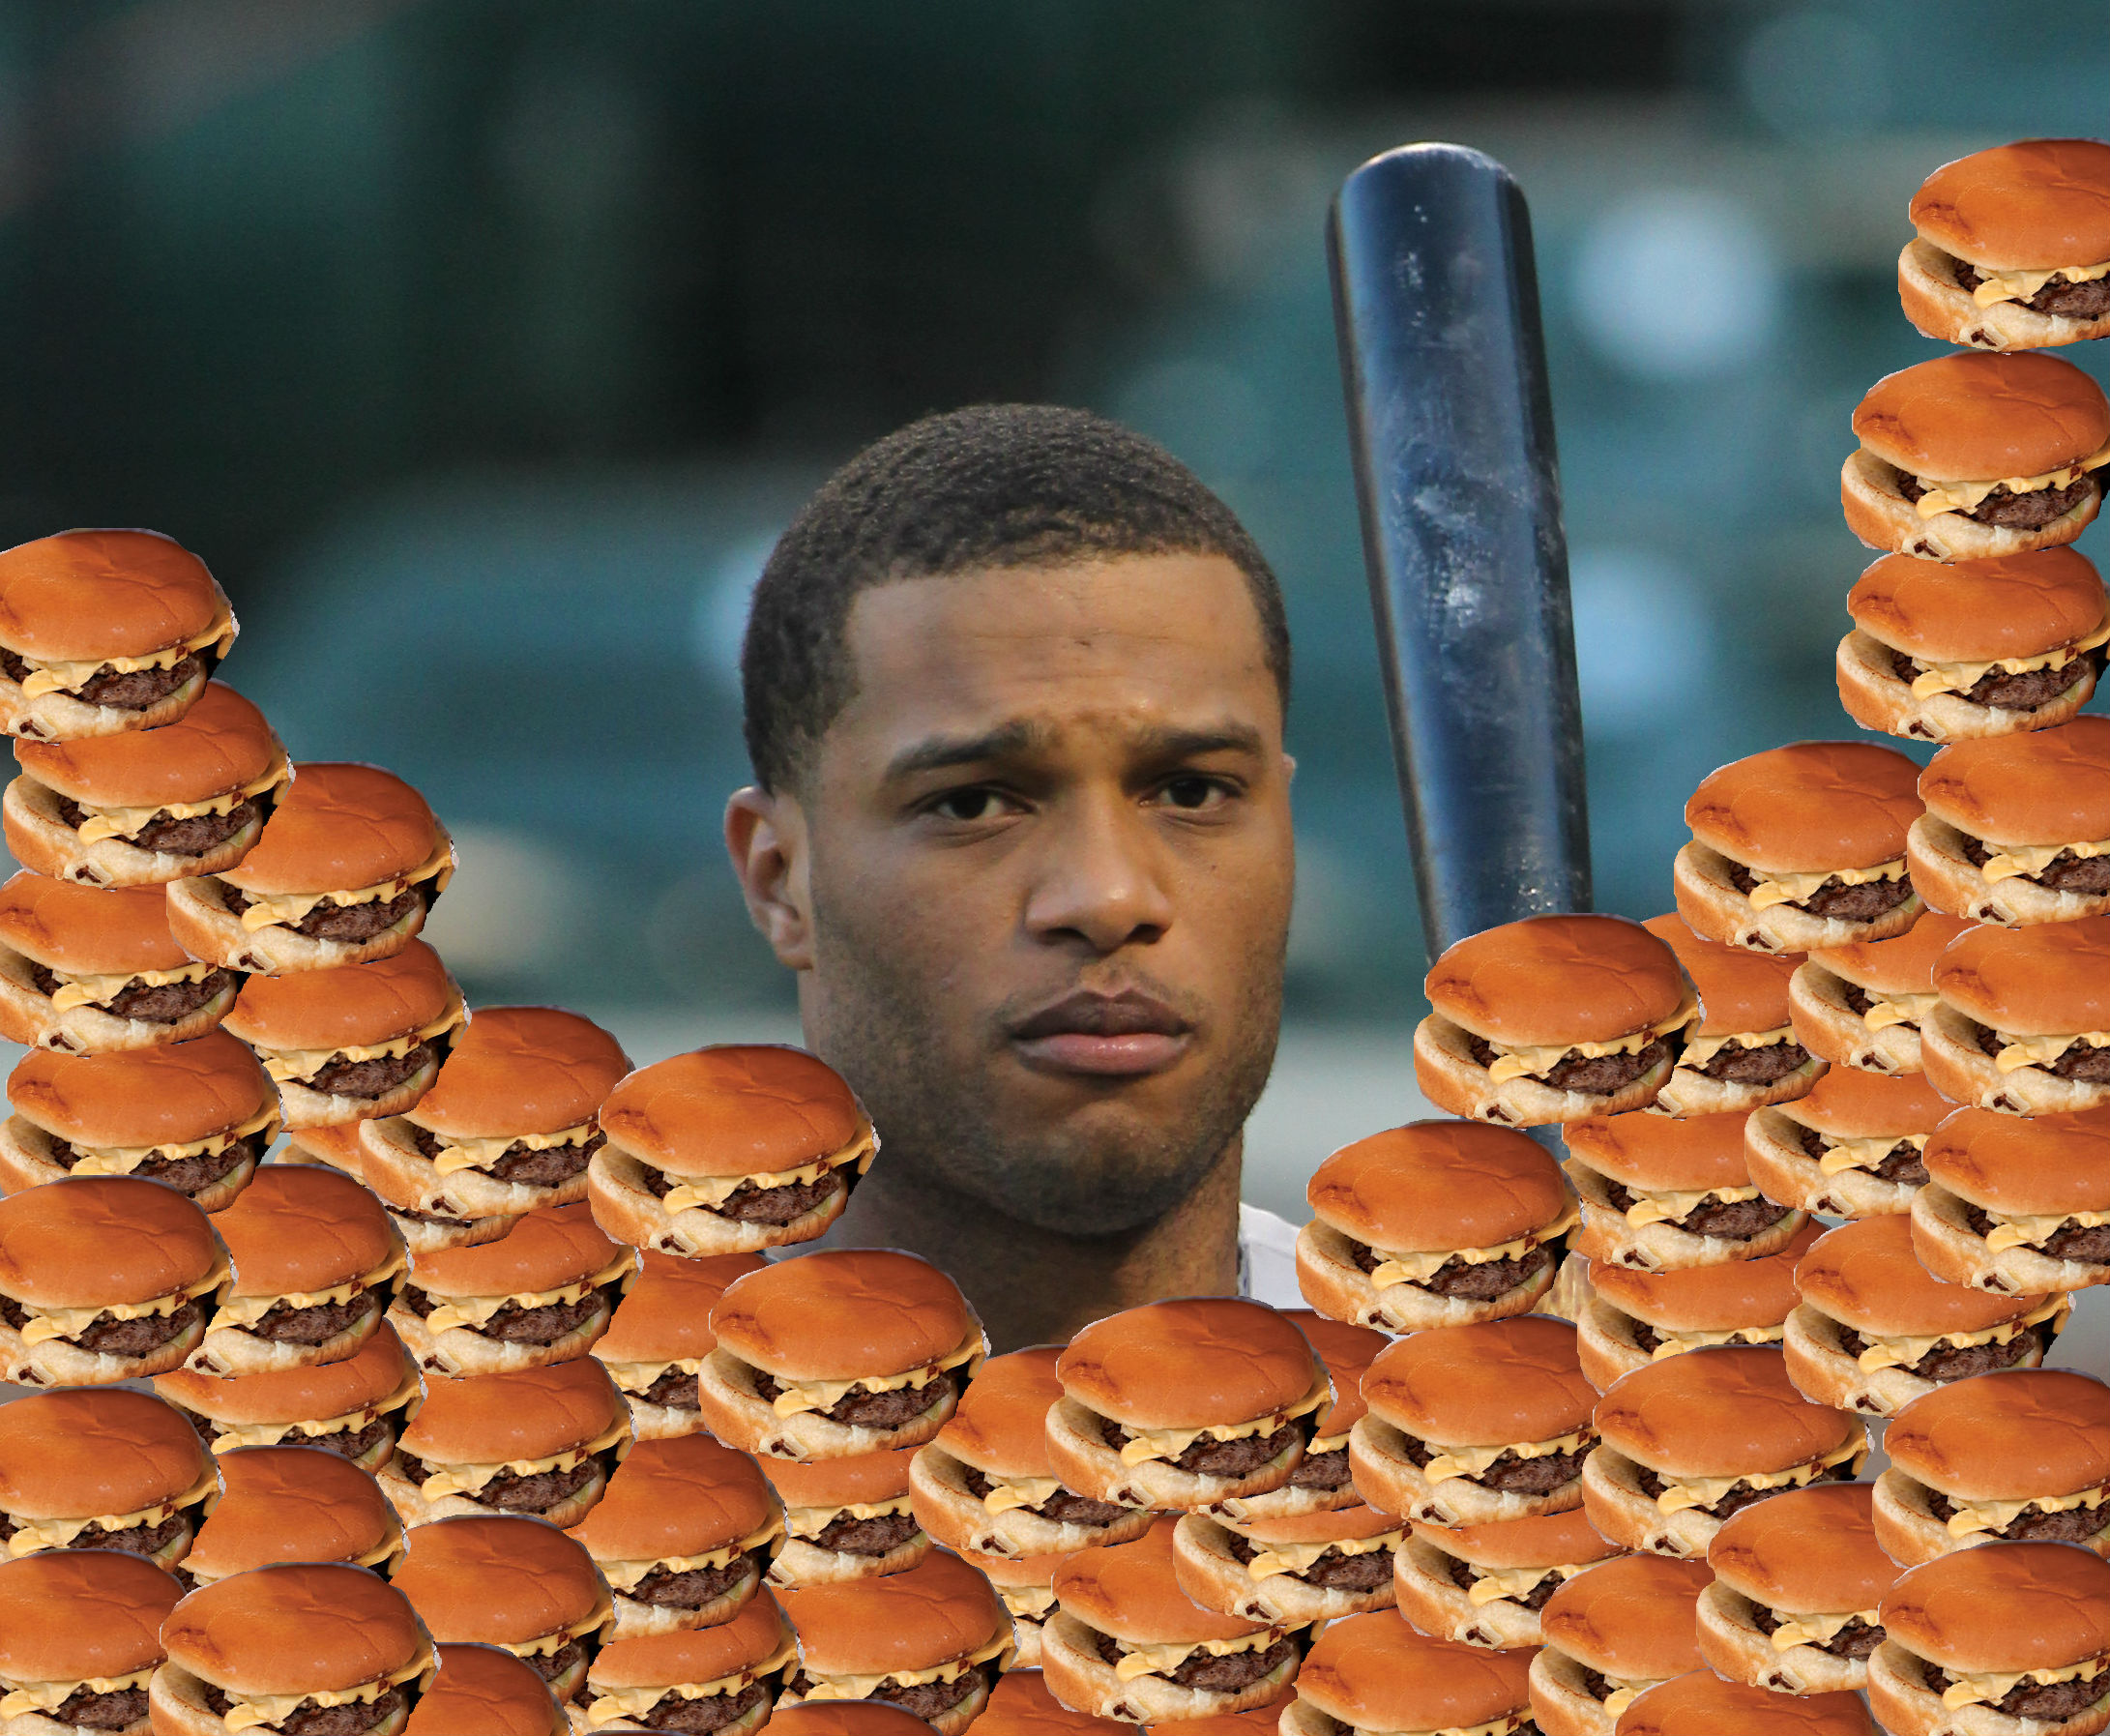 Robinson Cano can afford a lot of Dick's.